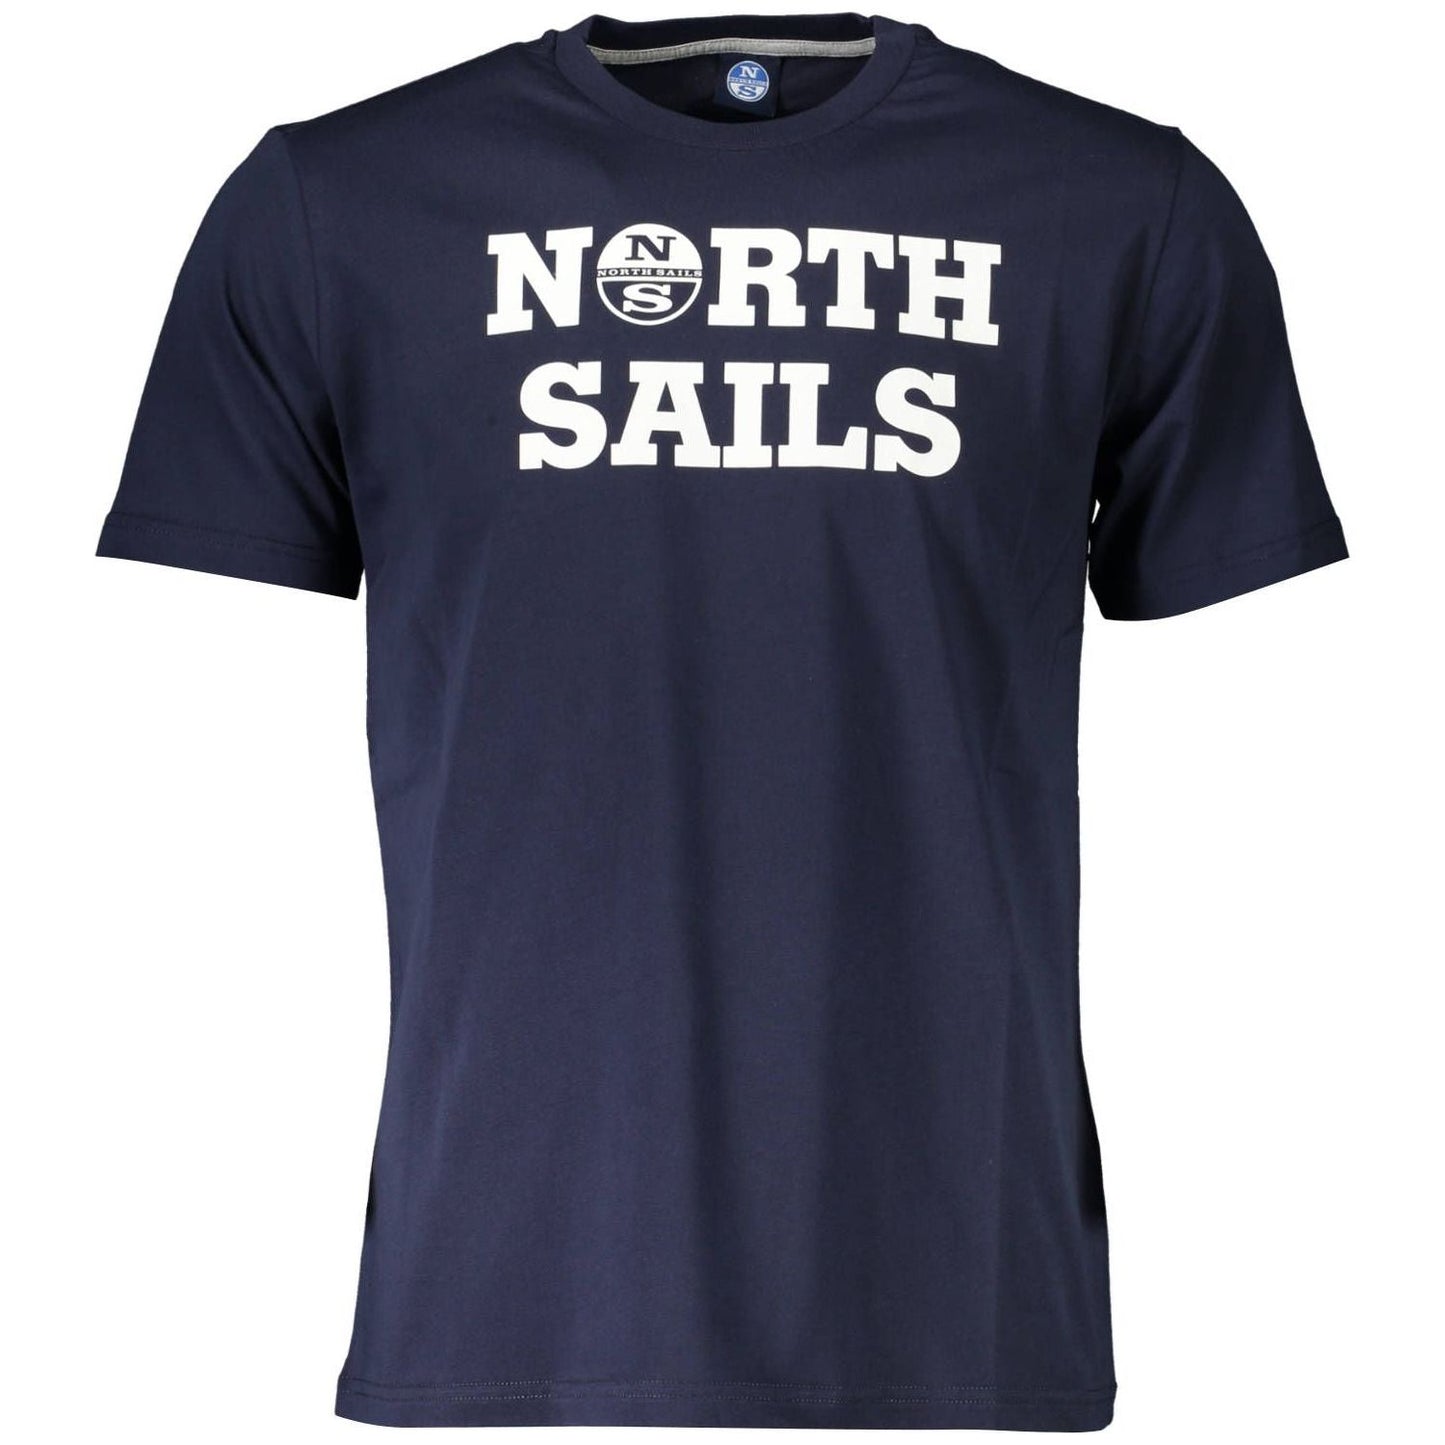 North Sails Chic Blue Cotton Tee with Classic Print chic-blue-cotton-tee-with-classic-print